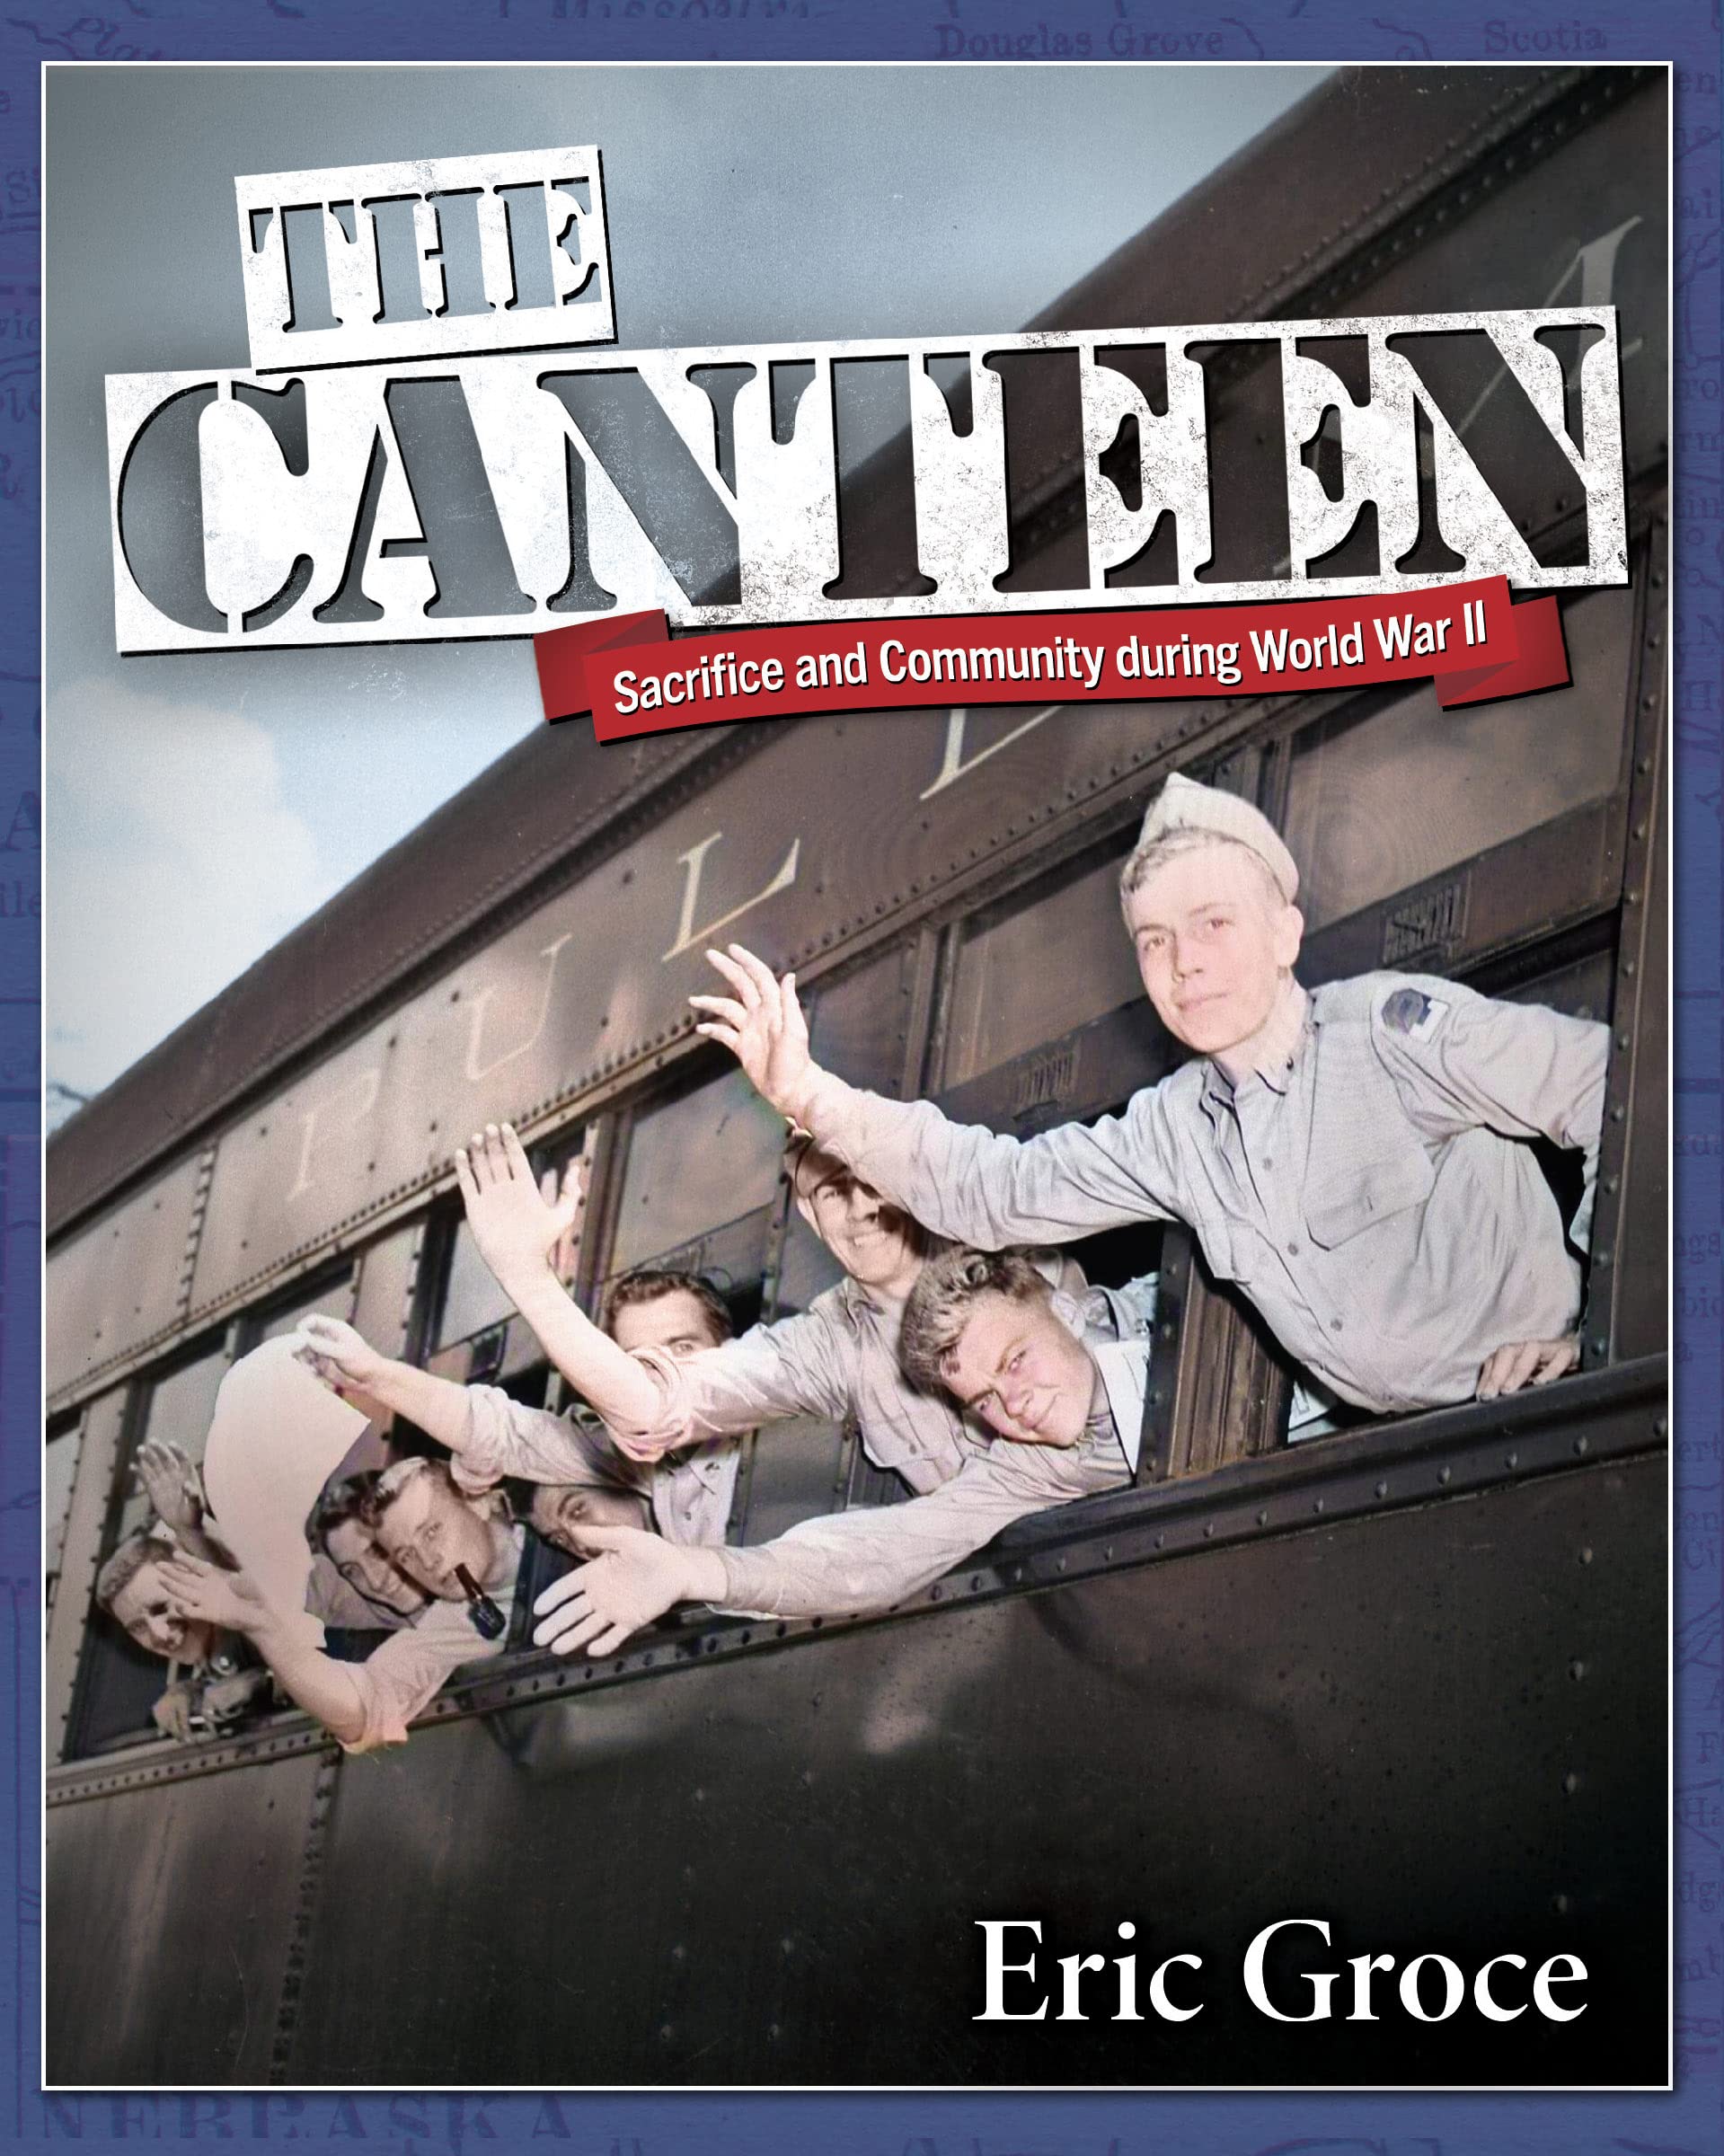 The Canteen: Sacrifice and Community during World War II